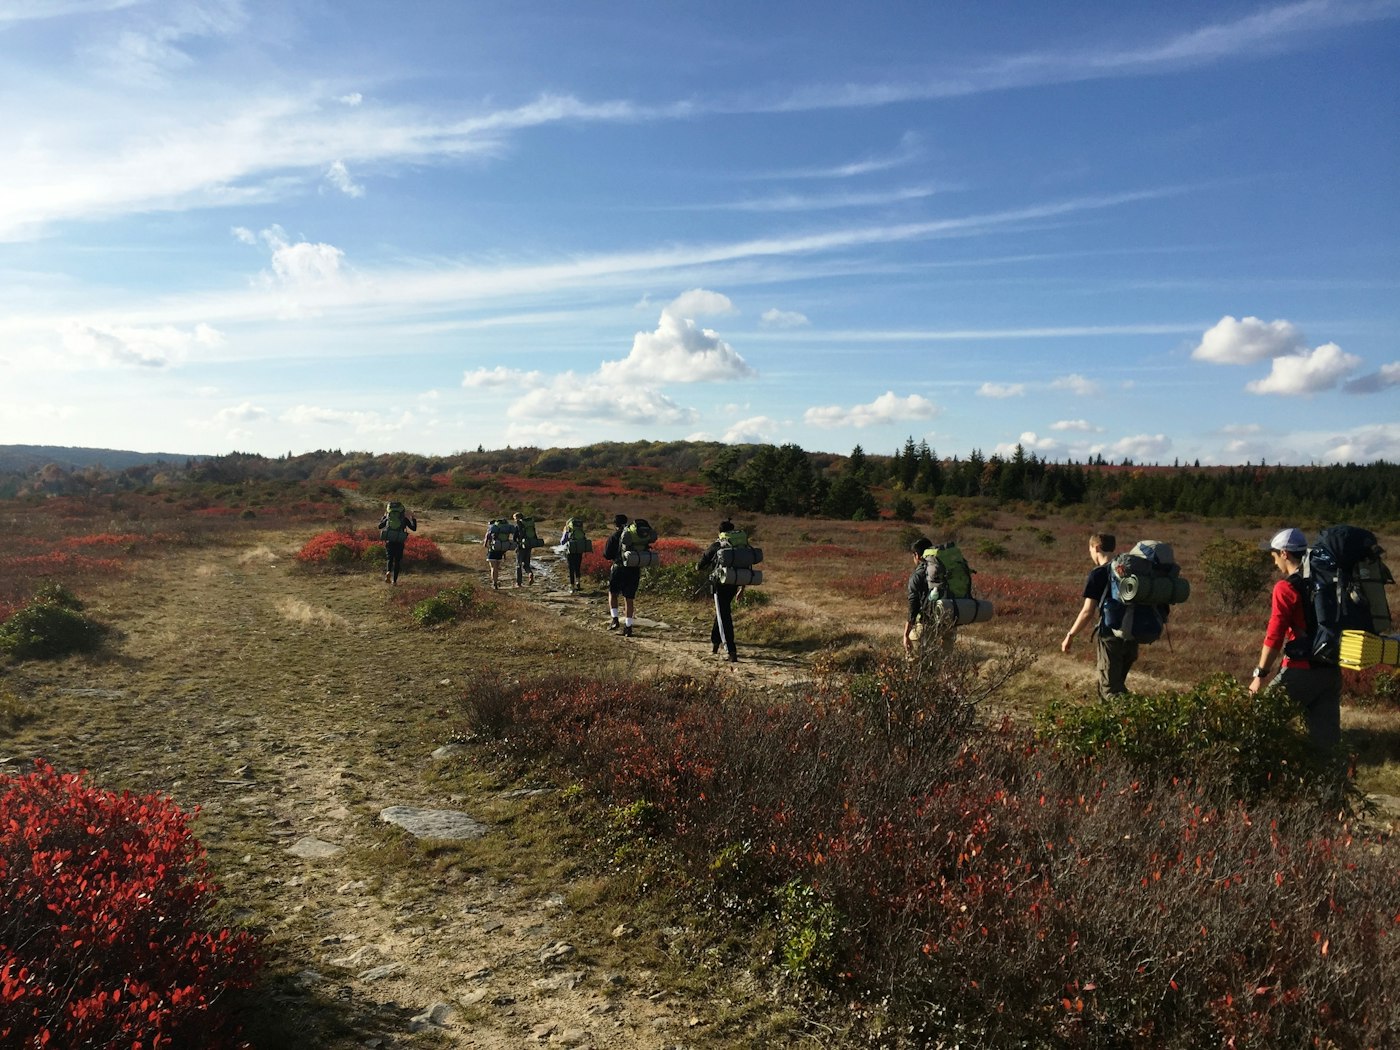 Photo of Backpacking the Dolly Sods Wilderness - E7e354a9b4f627642f9b049D094b8be4?w=1400&fit=crop&auto=format&s=5eb7927083e51550154aaab67b7b587b